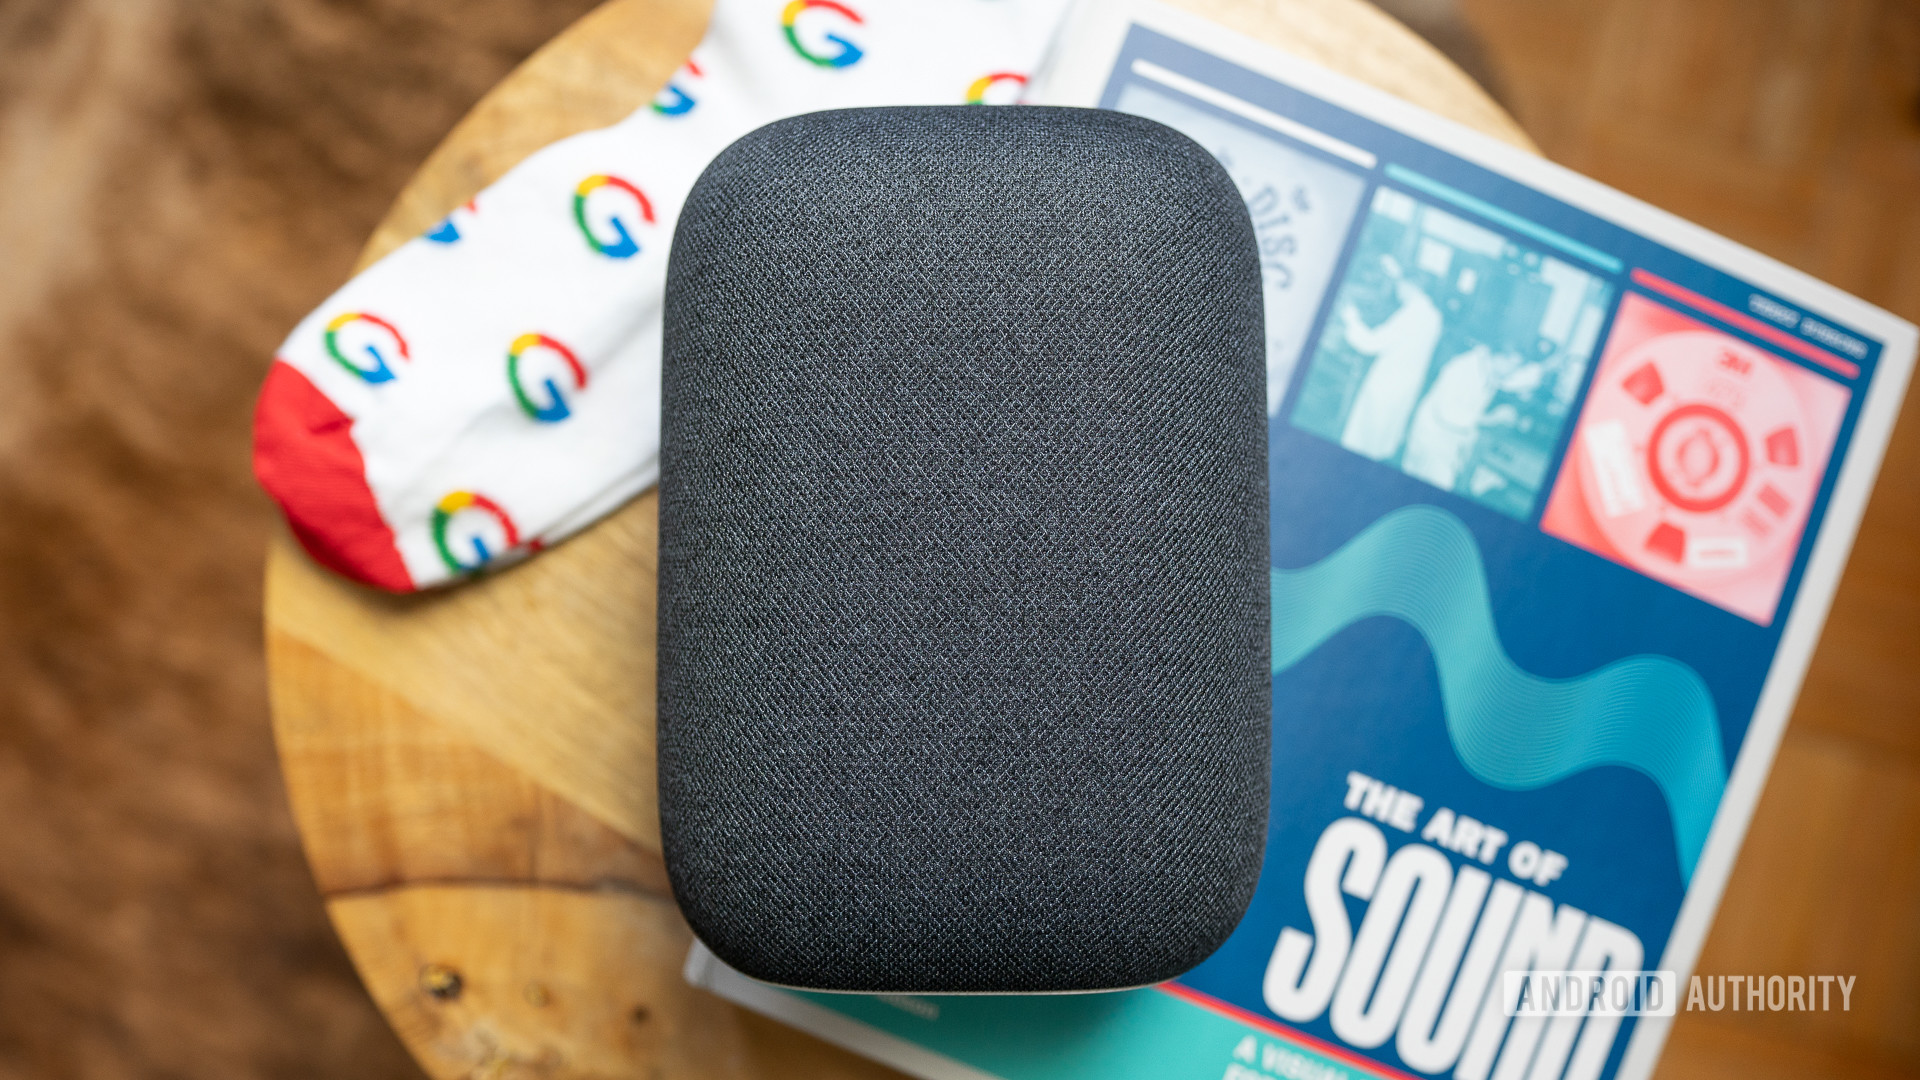 Google Nest Audio: Everything you need to know about the smart speaker